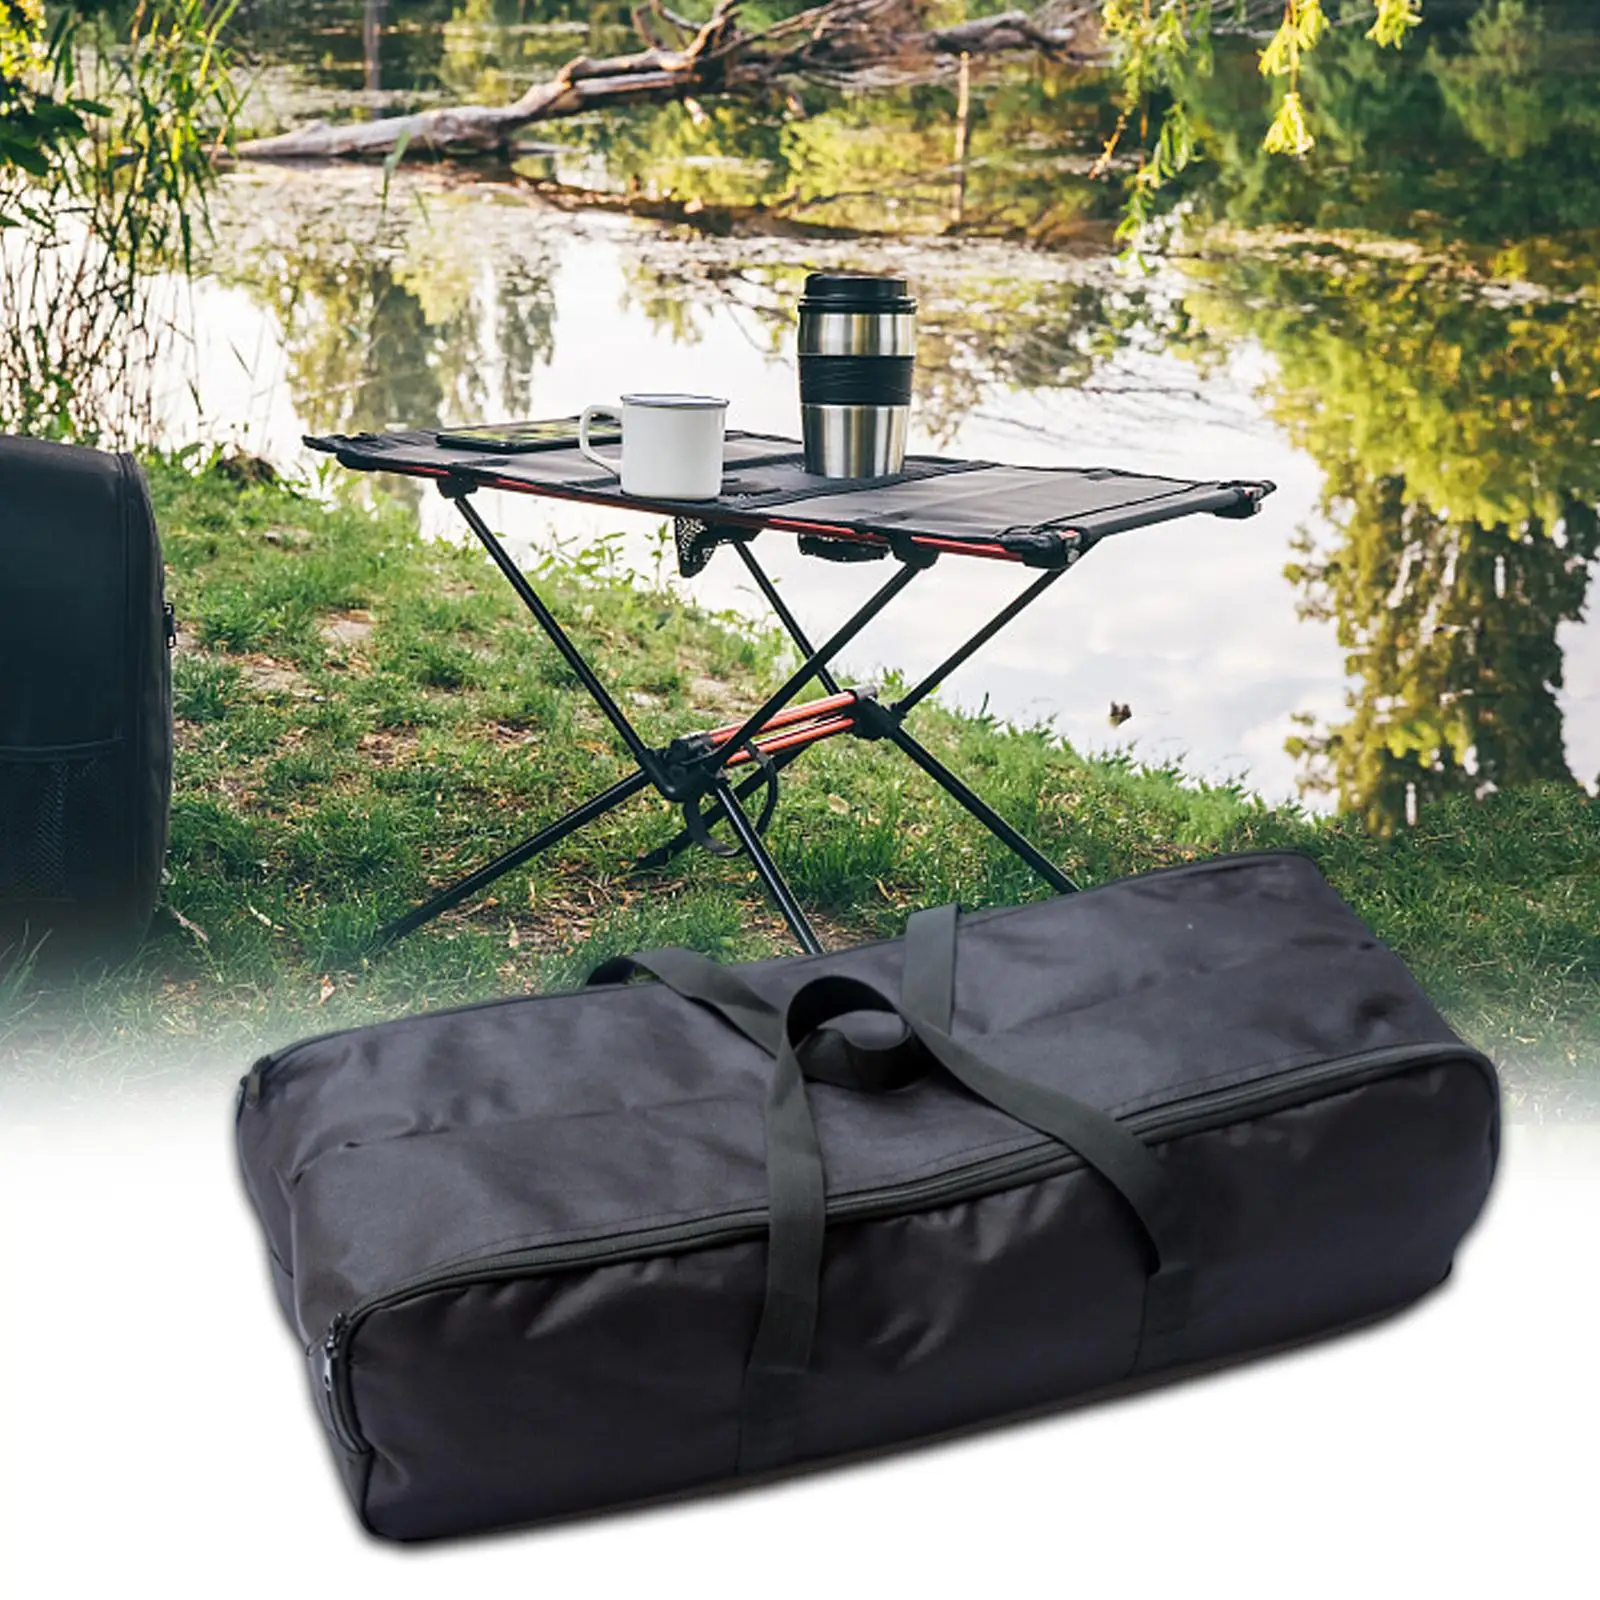 Outdoor Folding Chair Storage Bag Oxford Cloth Durable Size 26.4x11.4x7.5inch Organizer Pouch Waterproof Black Carrying Bag